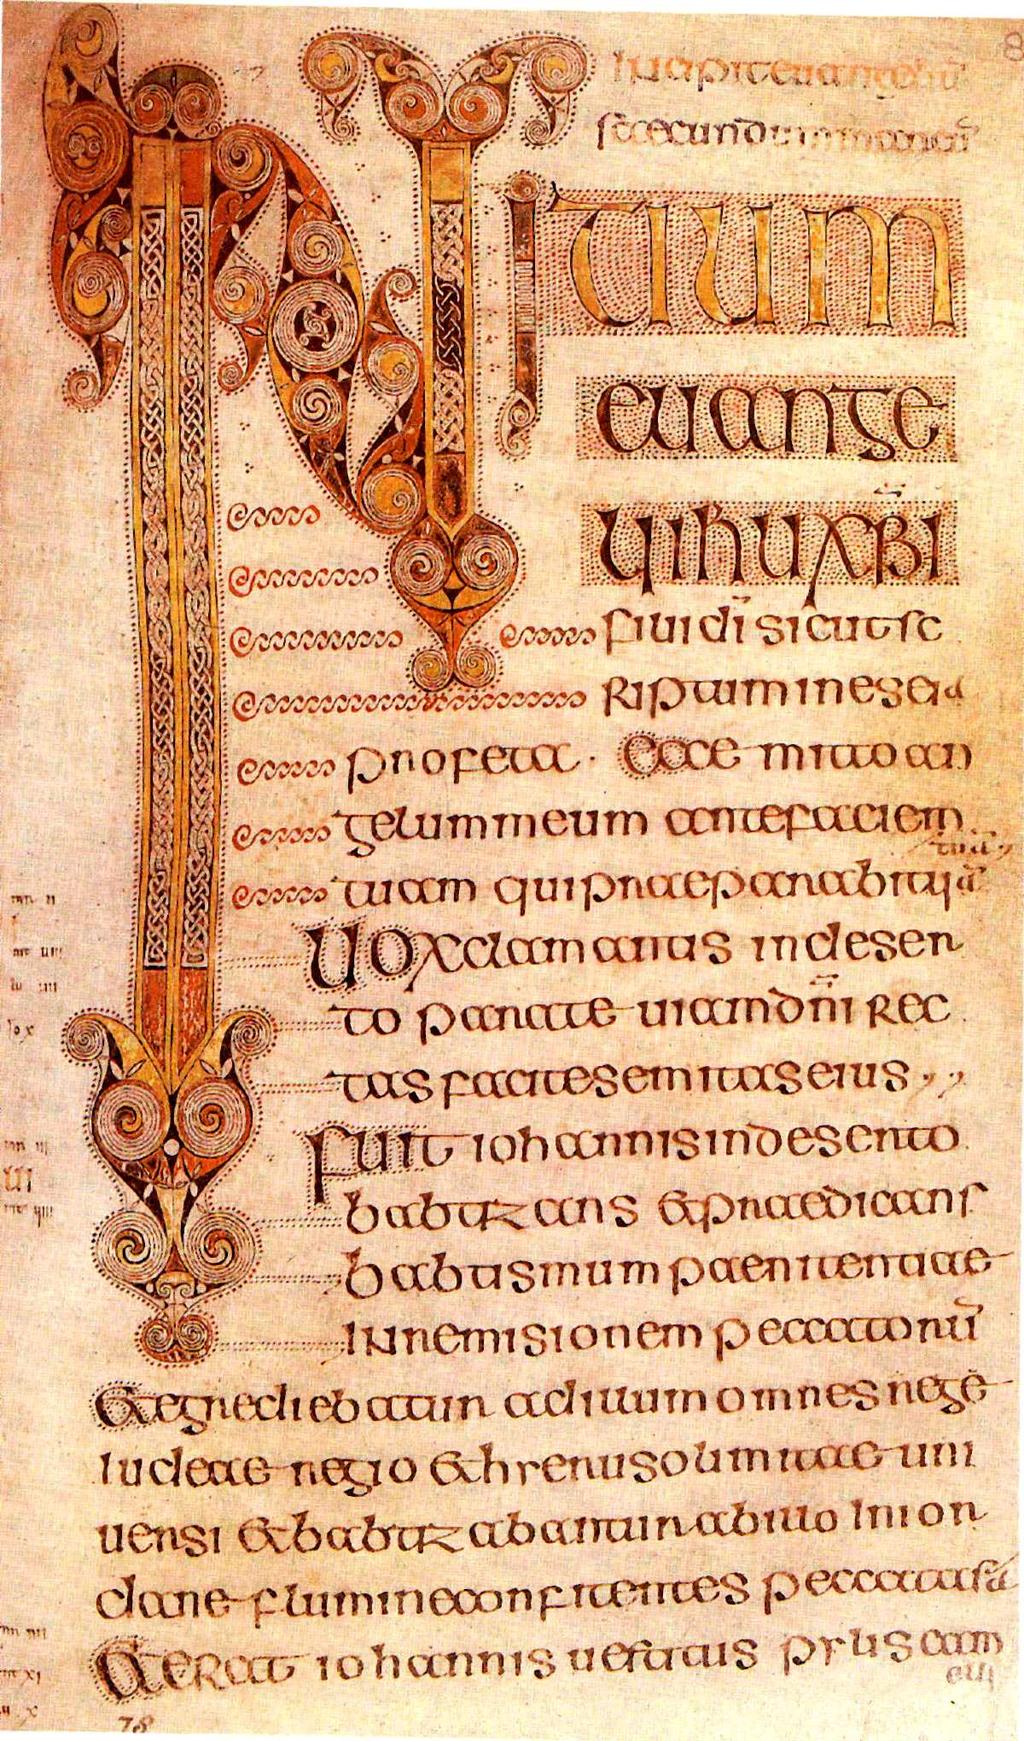 WHAT? - Unicials from The Vatican Vergil Unicials, 8th Century * Rounded strokes were made with pen held in a straight horizontal position Design/Style Contributions and Innovations: The Book of